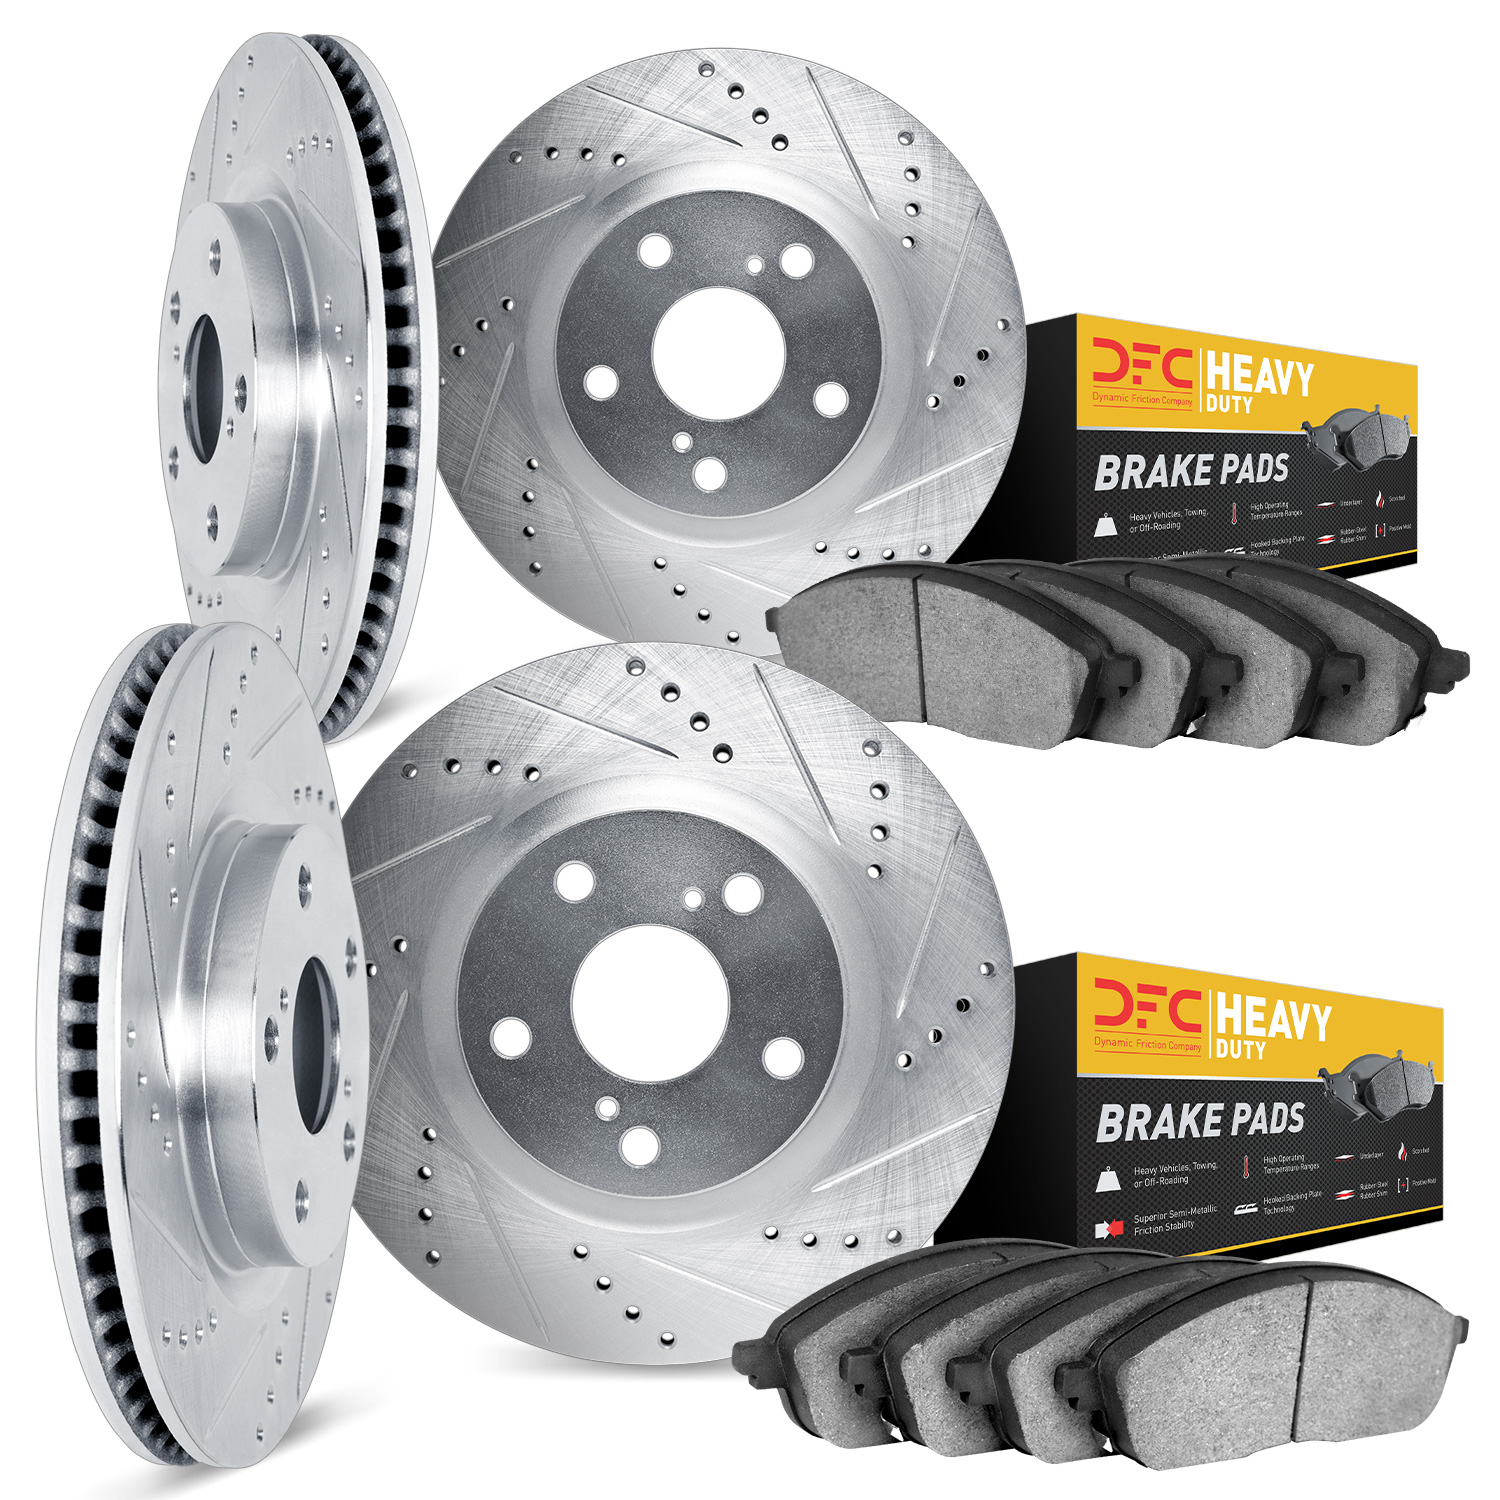 7204-55001 Drilled/Slotted Rotors w/Heavy-Duty Brake Pads Kit [Silver], 2003-2011 Ford/Lincoln/Mercury/Mazda, Position: Front an